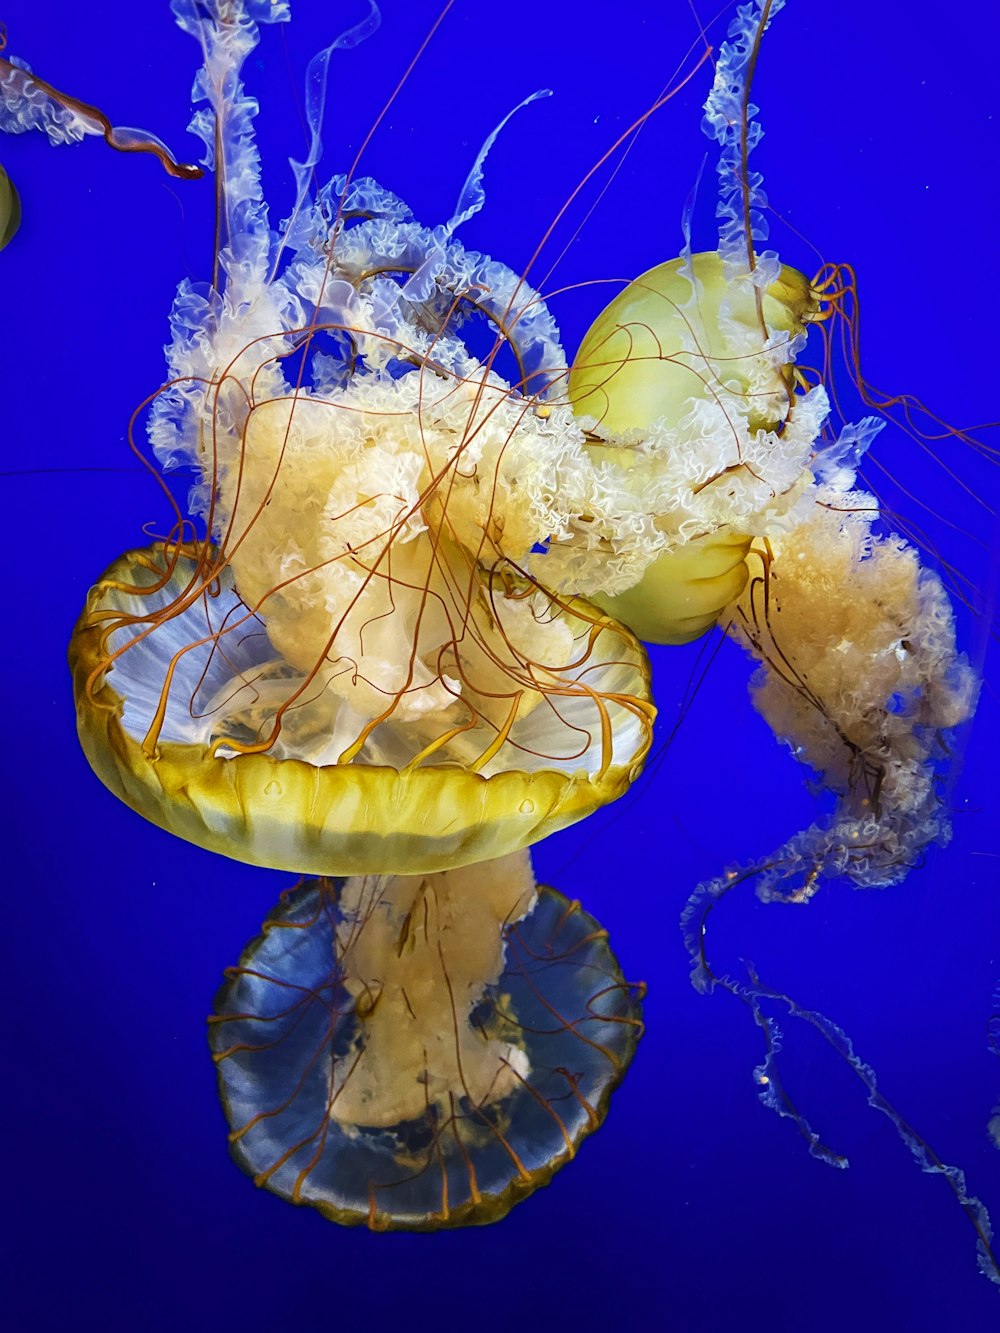 a yellow jellyfish swimming in a blue water tank